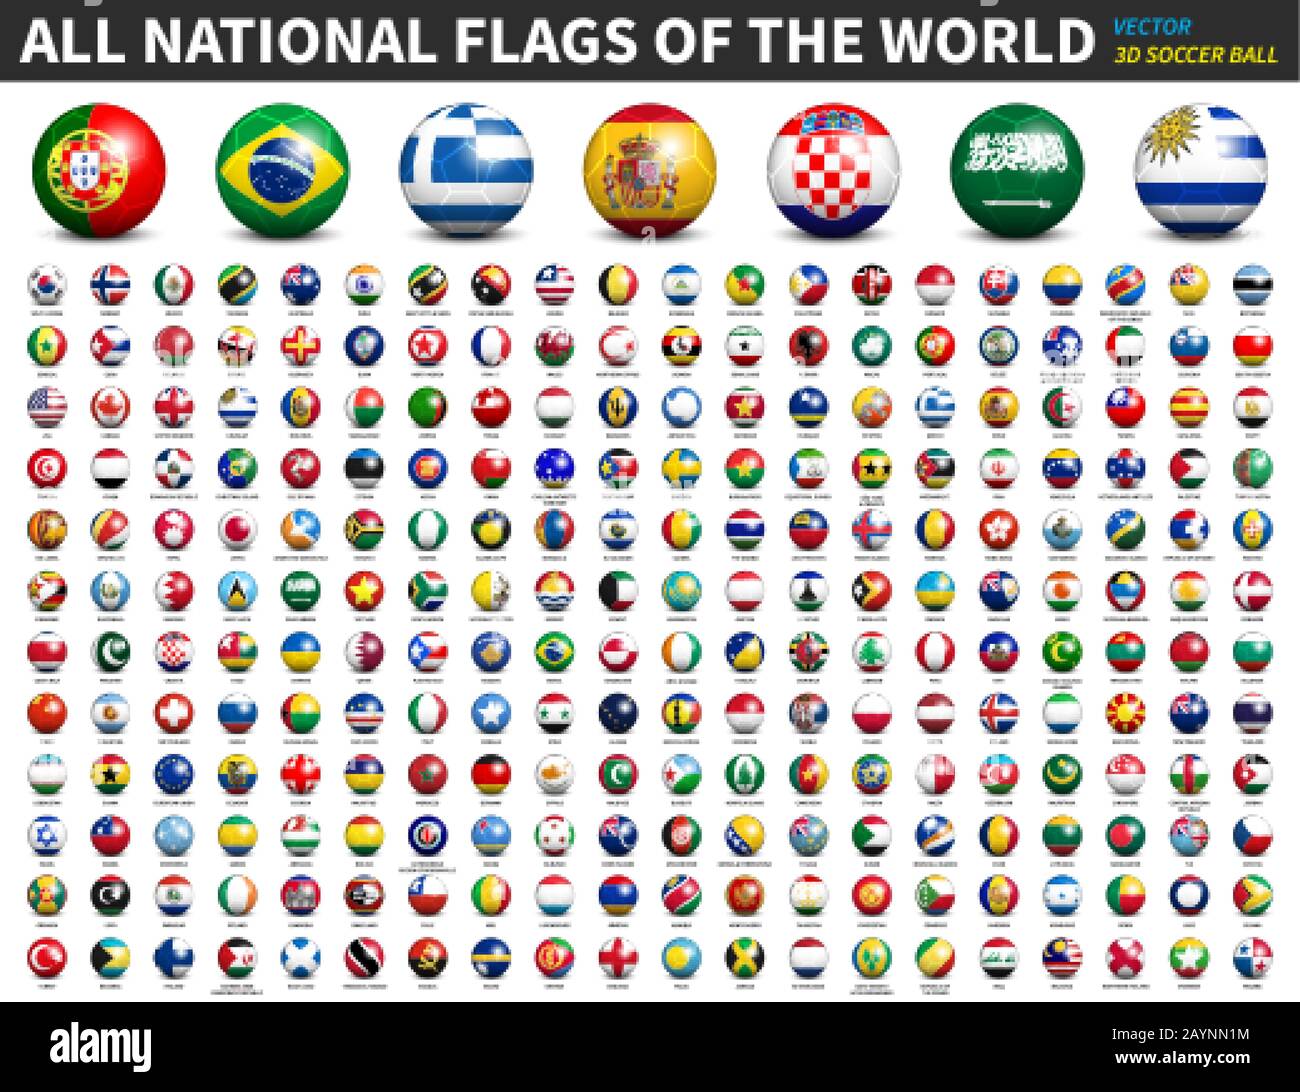 All national flags of the world . 3D Soccer ball or football design . Vector . Stock Vector